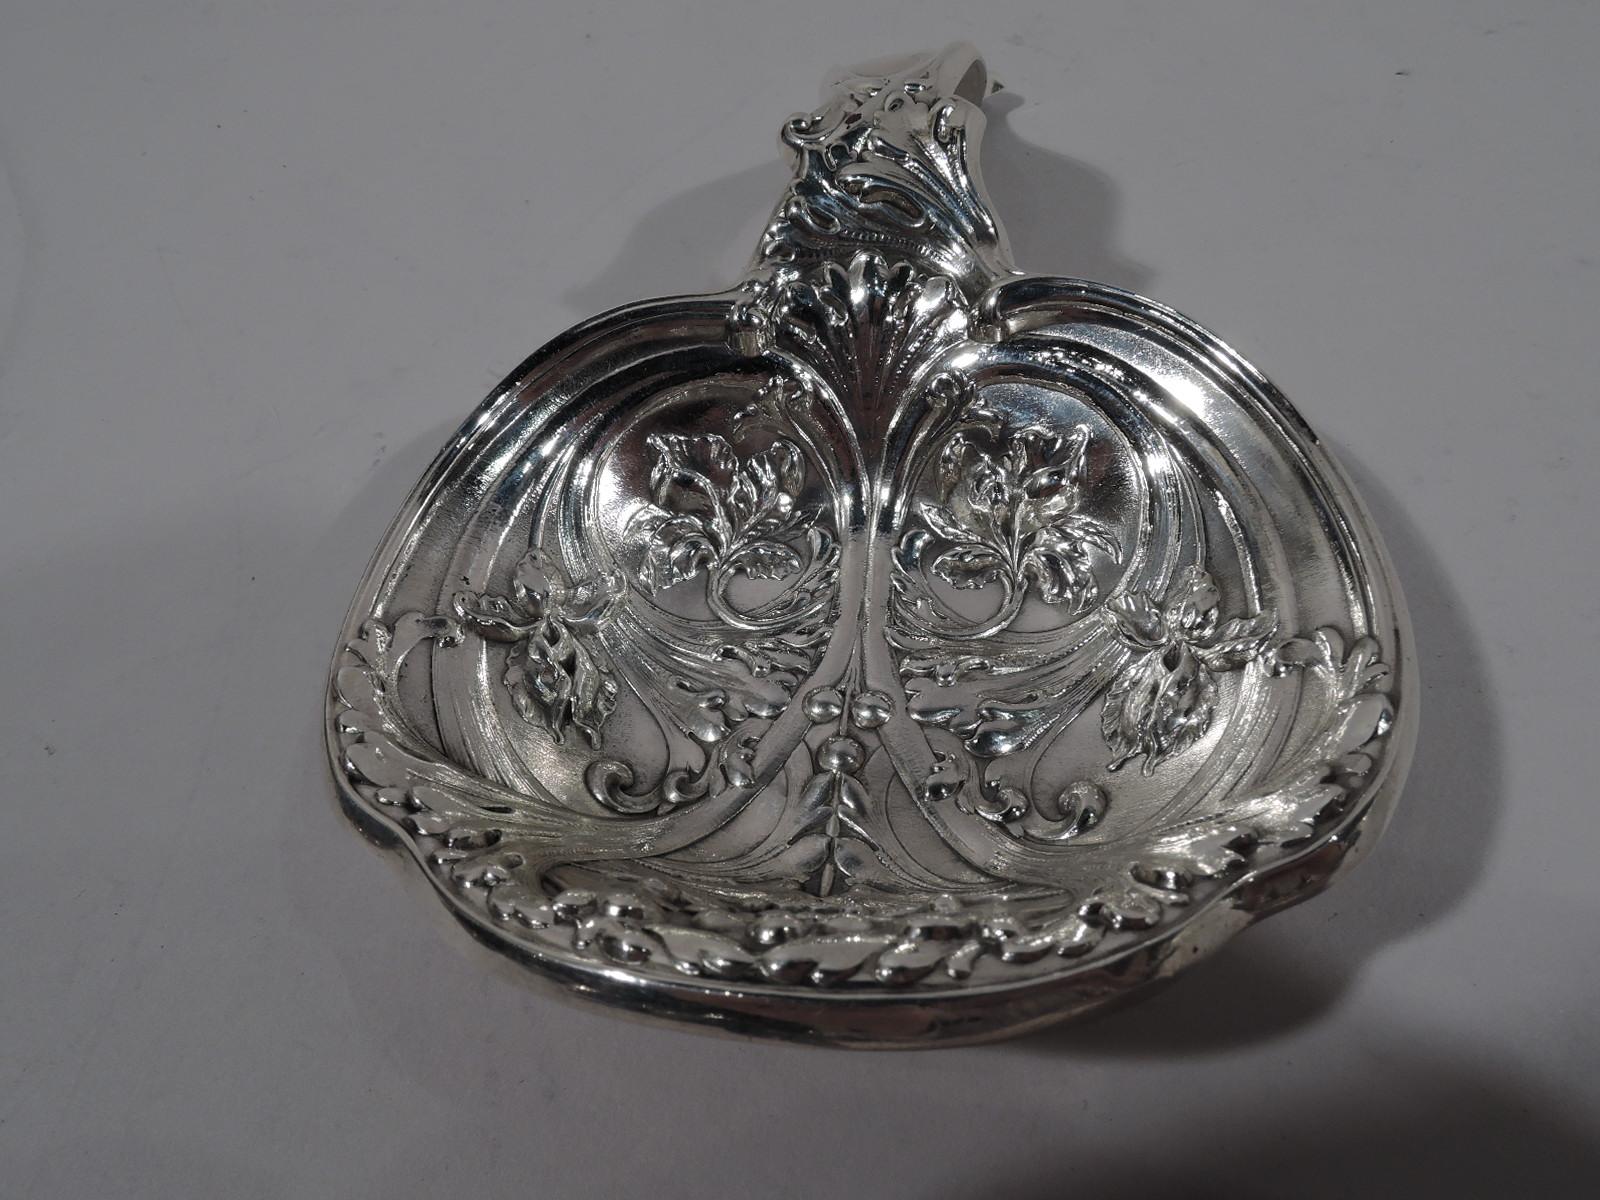 Turn-of-the-century Art Nouveau sterling silver bonbon scoop. Made by Gorham in Providence. Round shaped bowl with arched handle. Dynamic ornament with swooshing and colliding leafy scrolls. Fully marked and numbered A4224. Weight: 4.5 troy ounces.